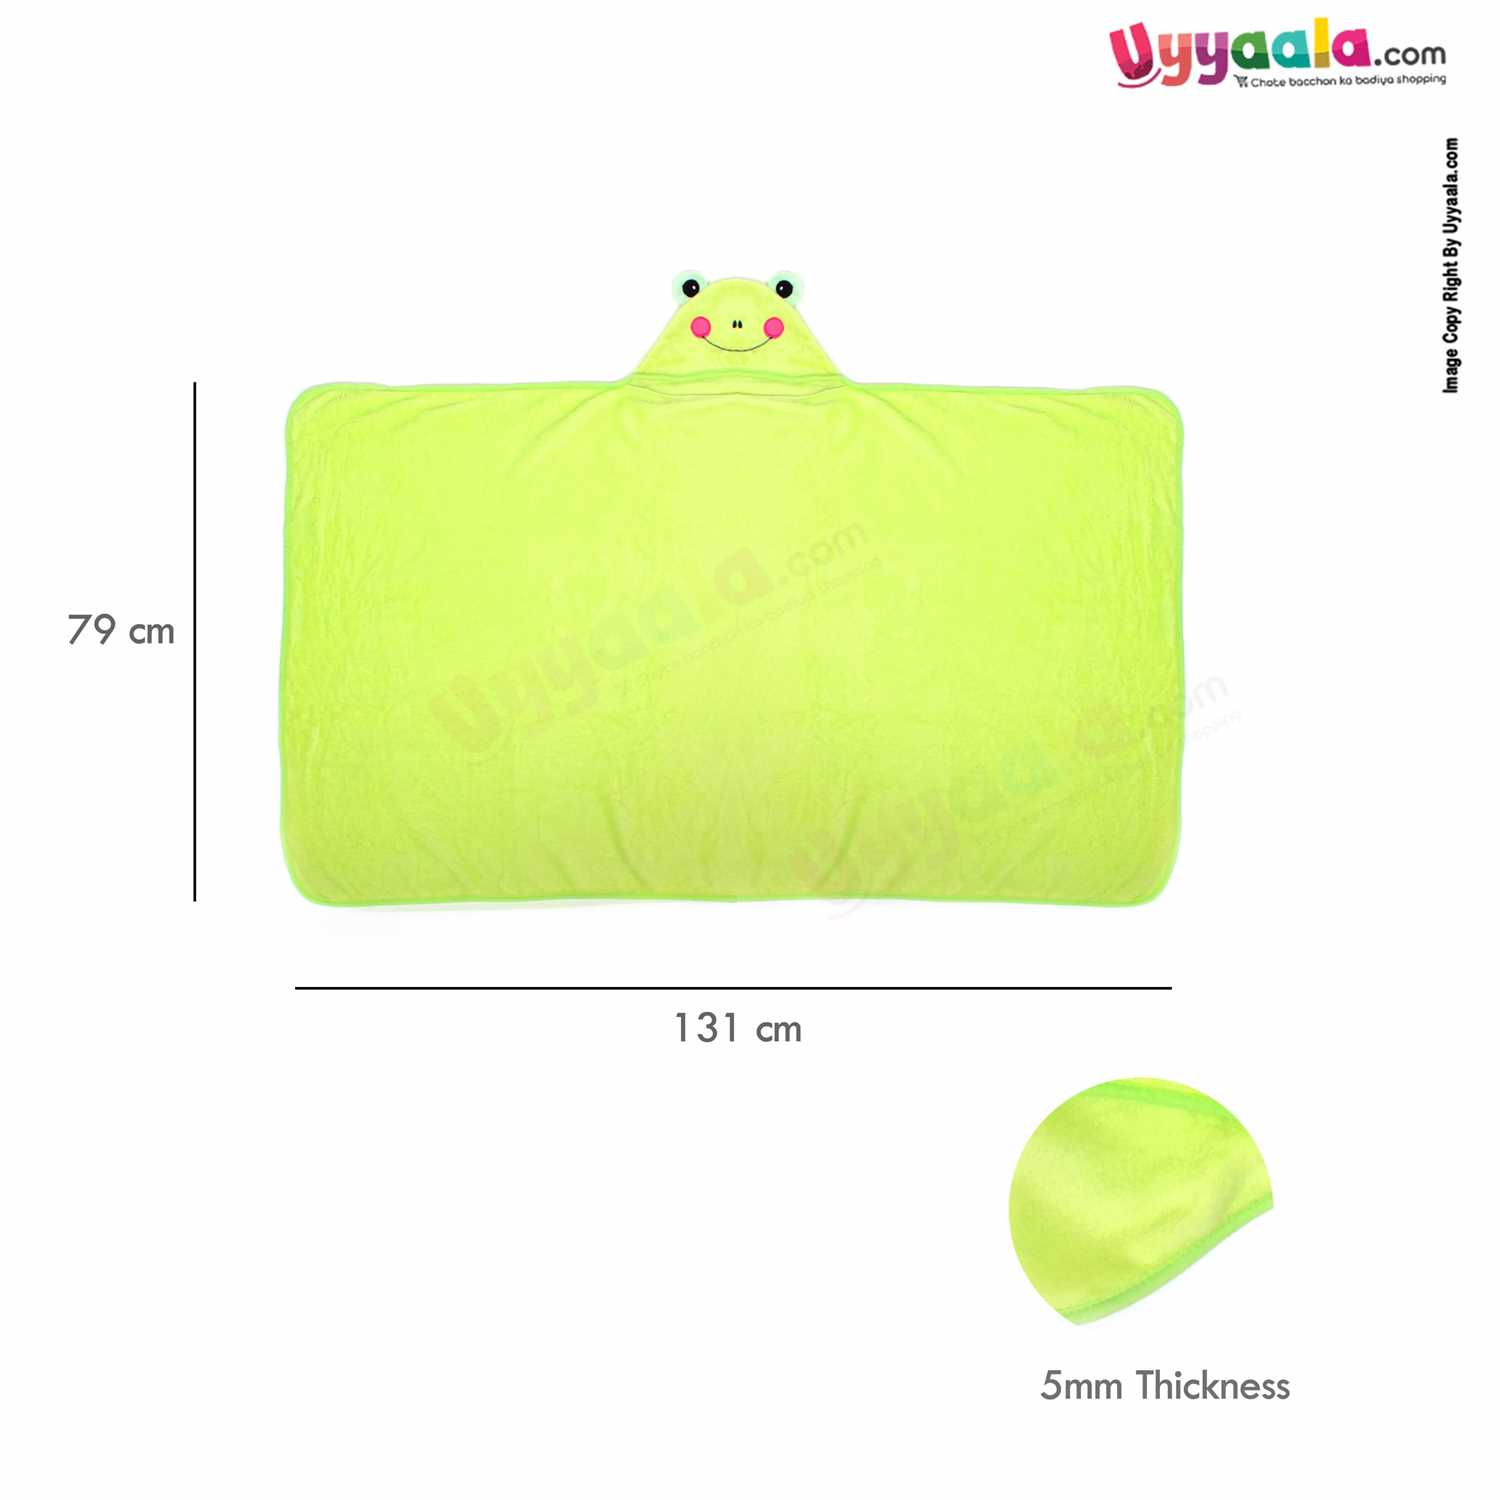 Hooded Coral Fur Blanket with Frog Character 0-24m Age, Green